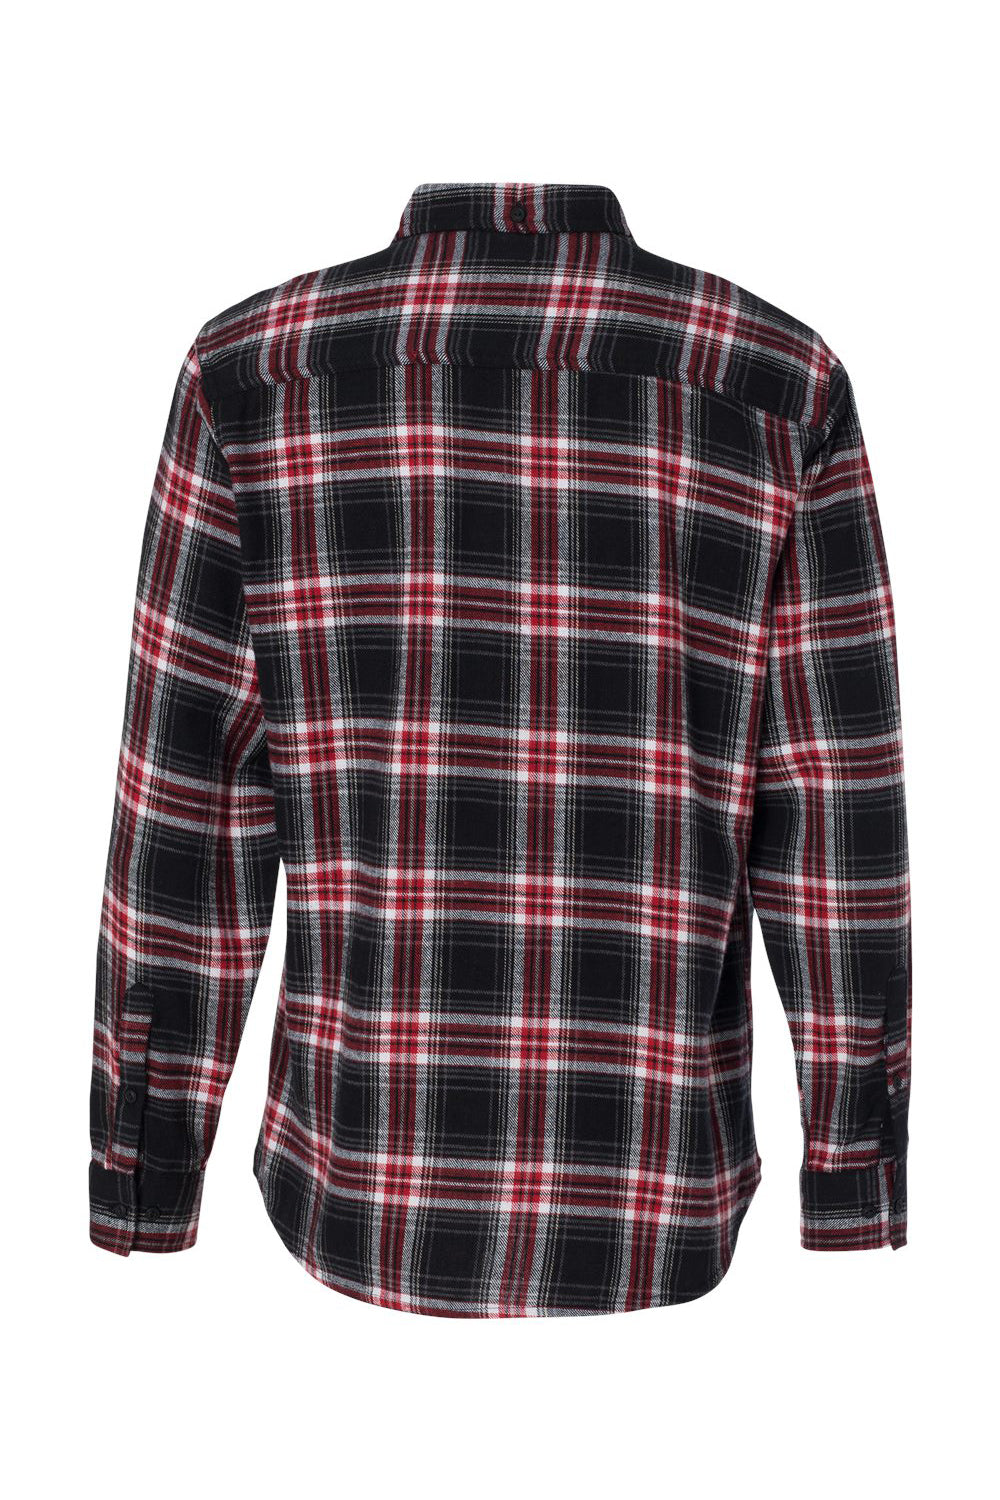 Burnside B8210/8210 Mens Flannel Long Sleeve Button Down Shirt w/ Double Pockets Red Flat Back